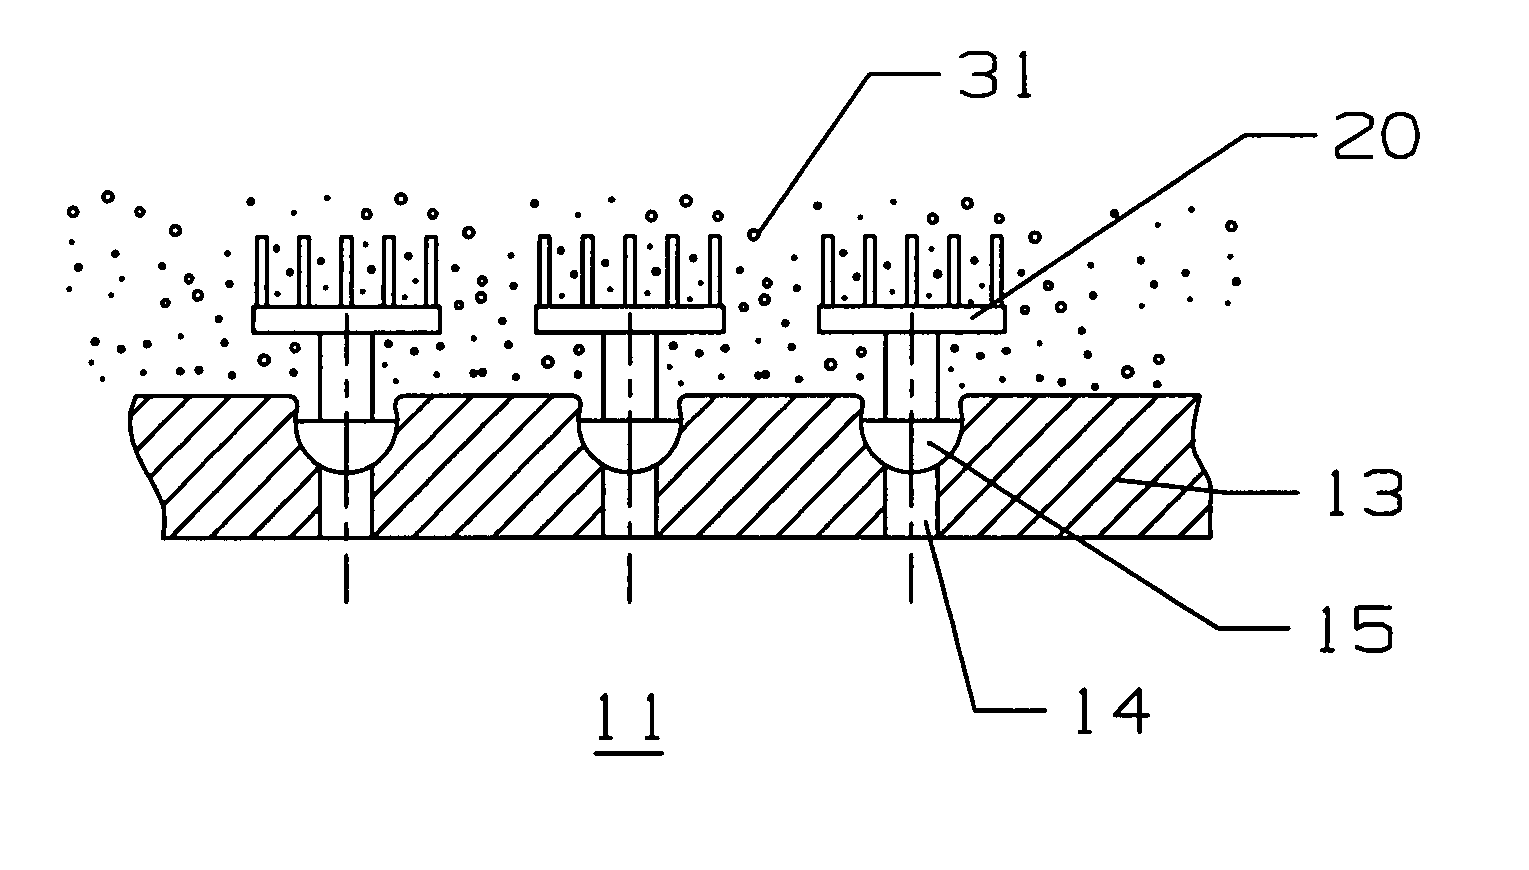 Multi-metering and diffusion transpiration cooled airfoil